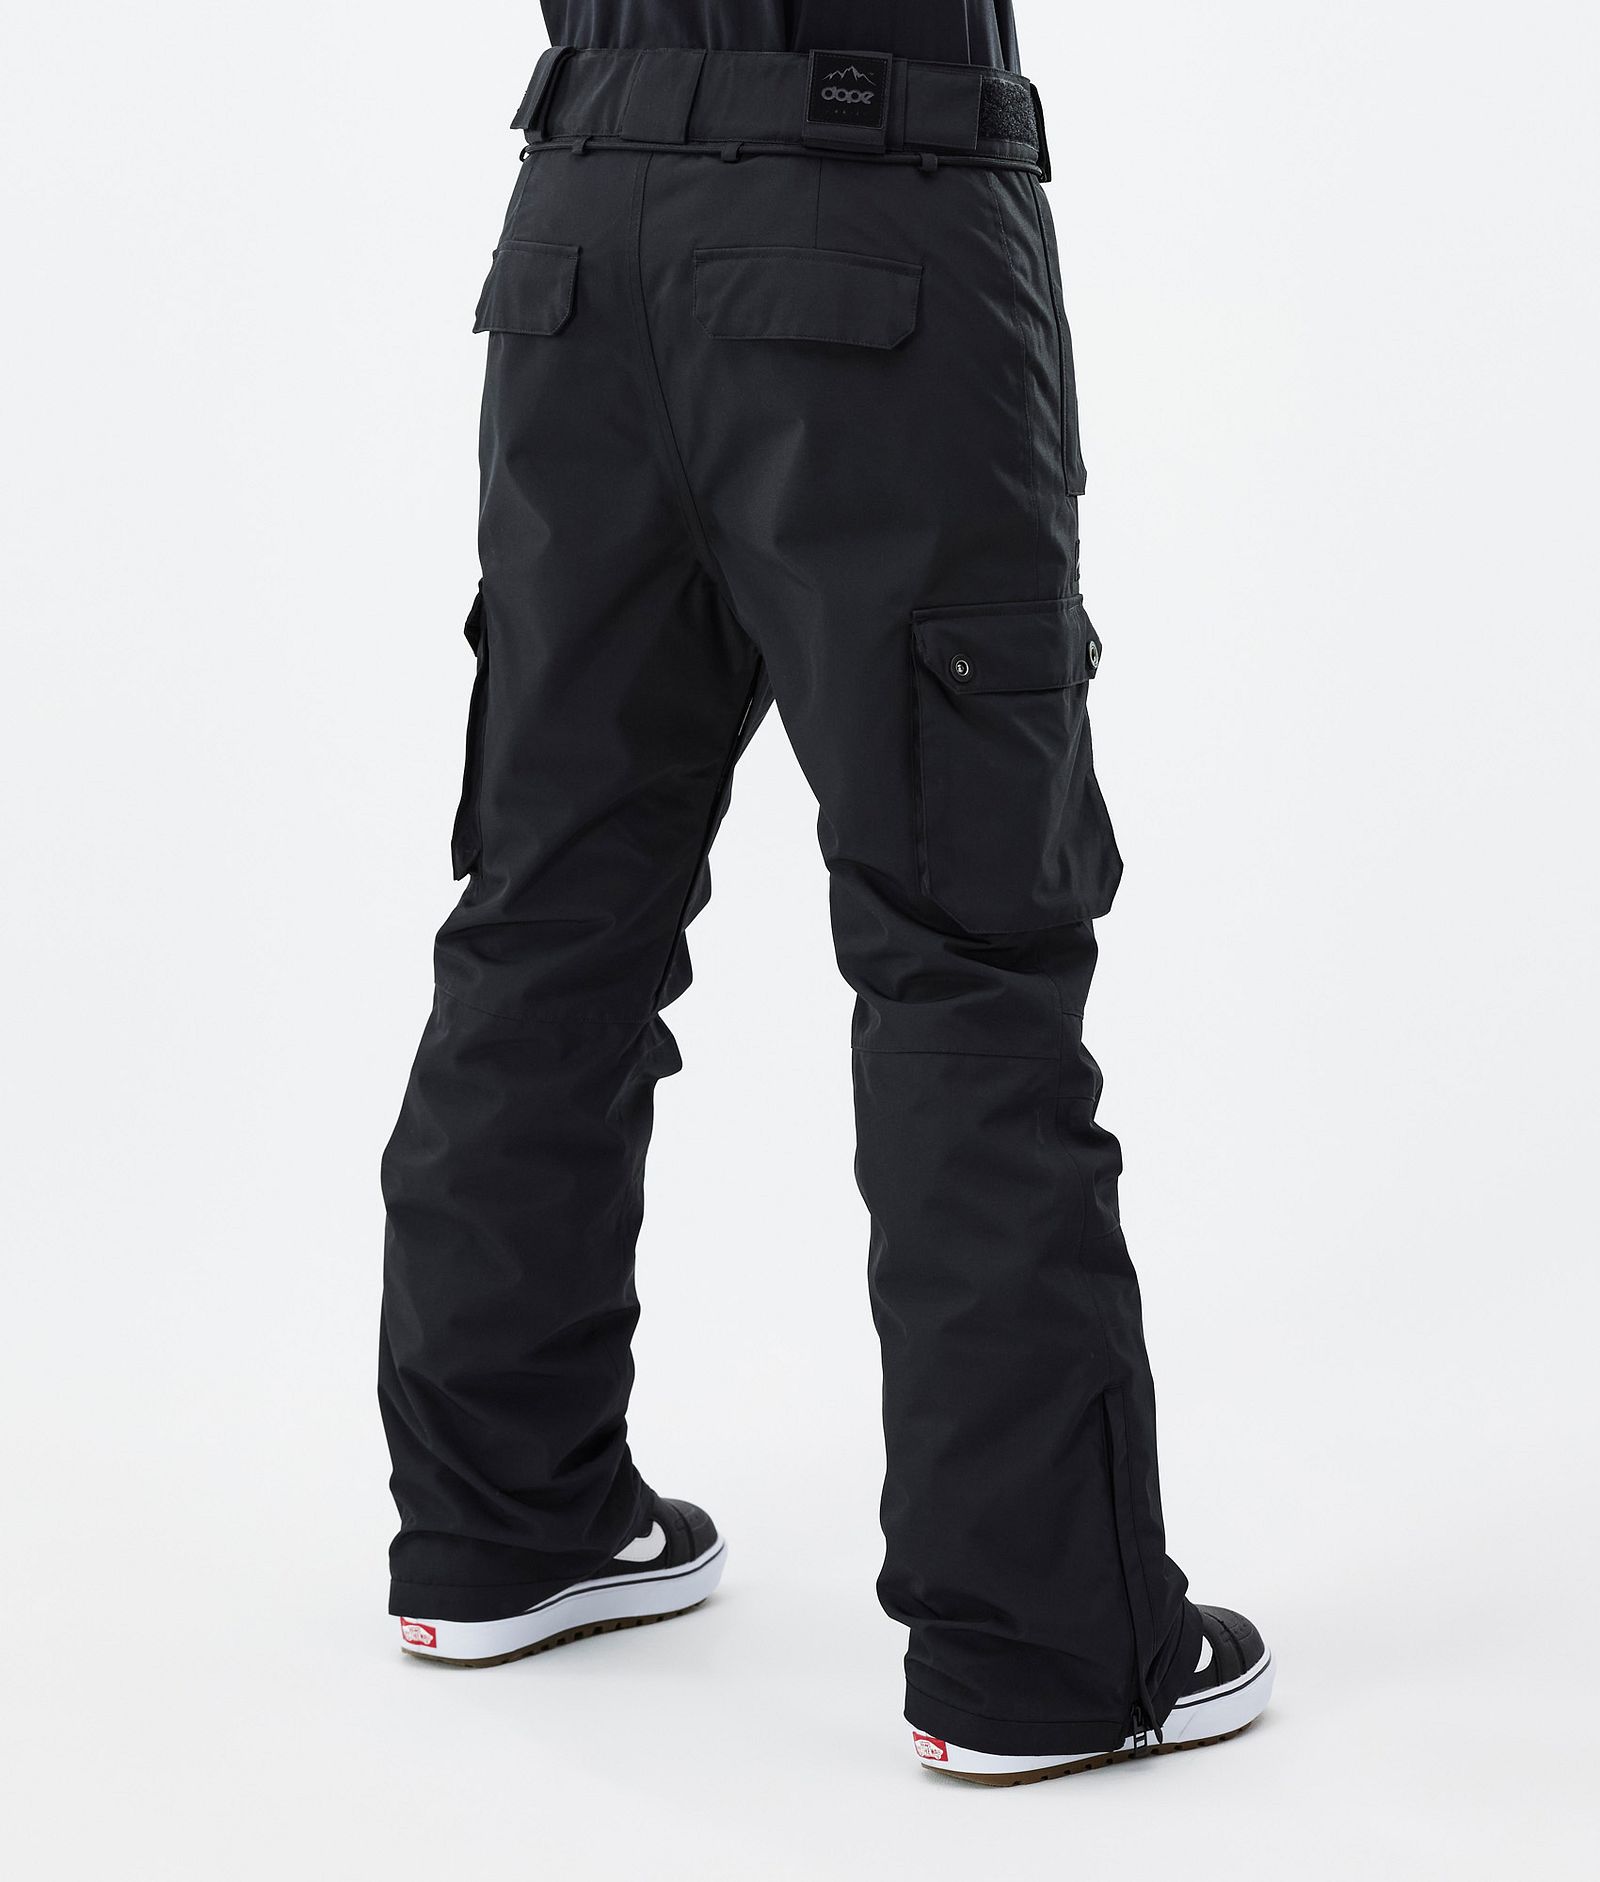 Dope Iconic W Snowboard Pants Women Blackout, Image 4 of 7